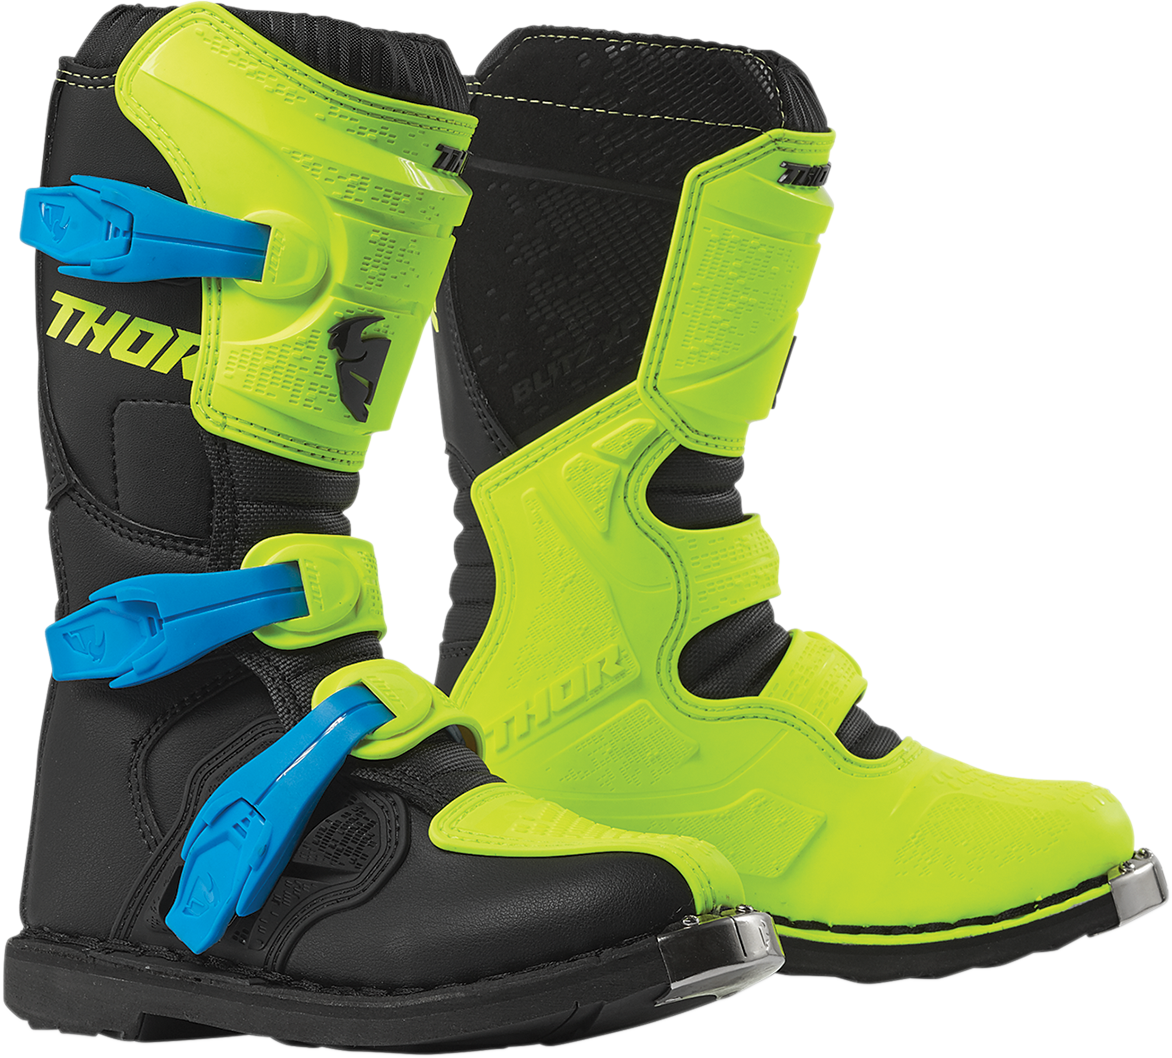 Youth Blitz XP Boots - Green Fluorescent/Black - Size 4